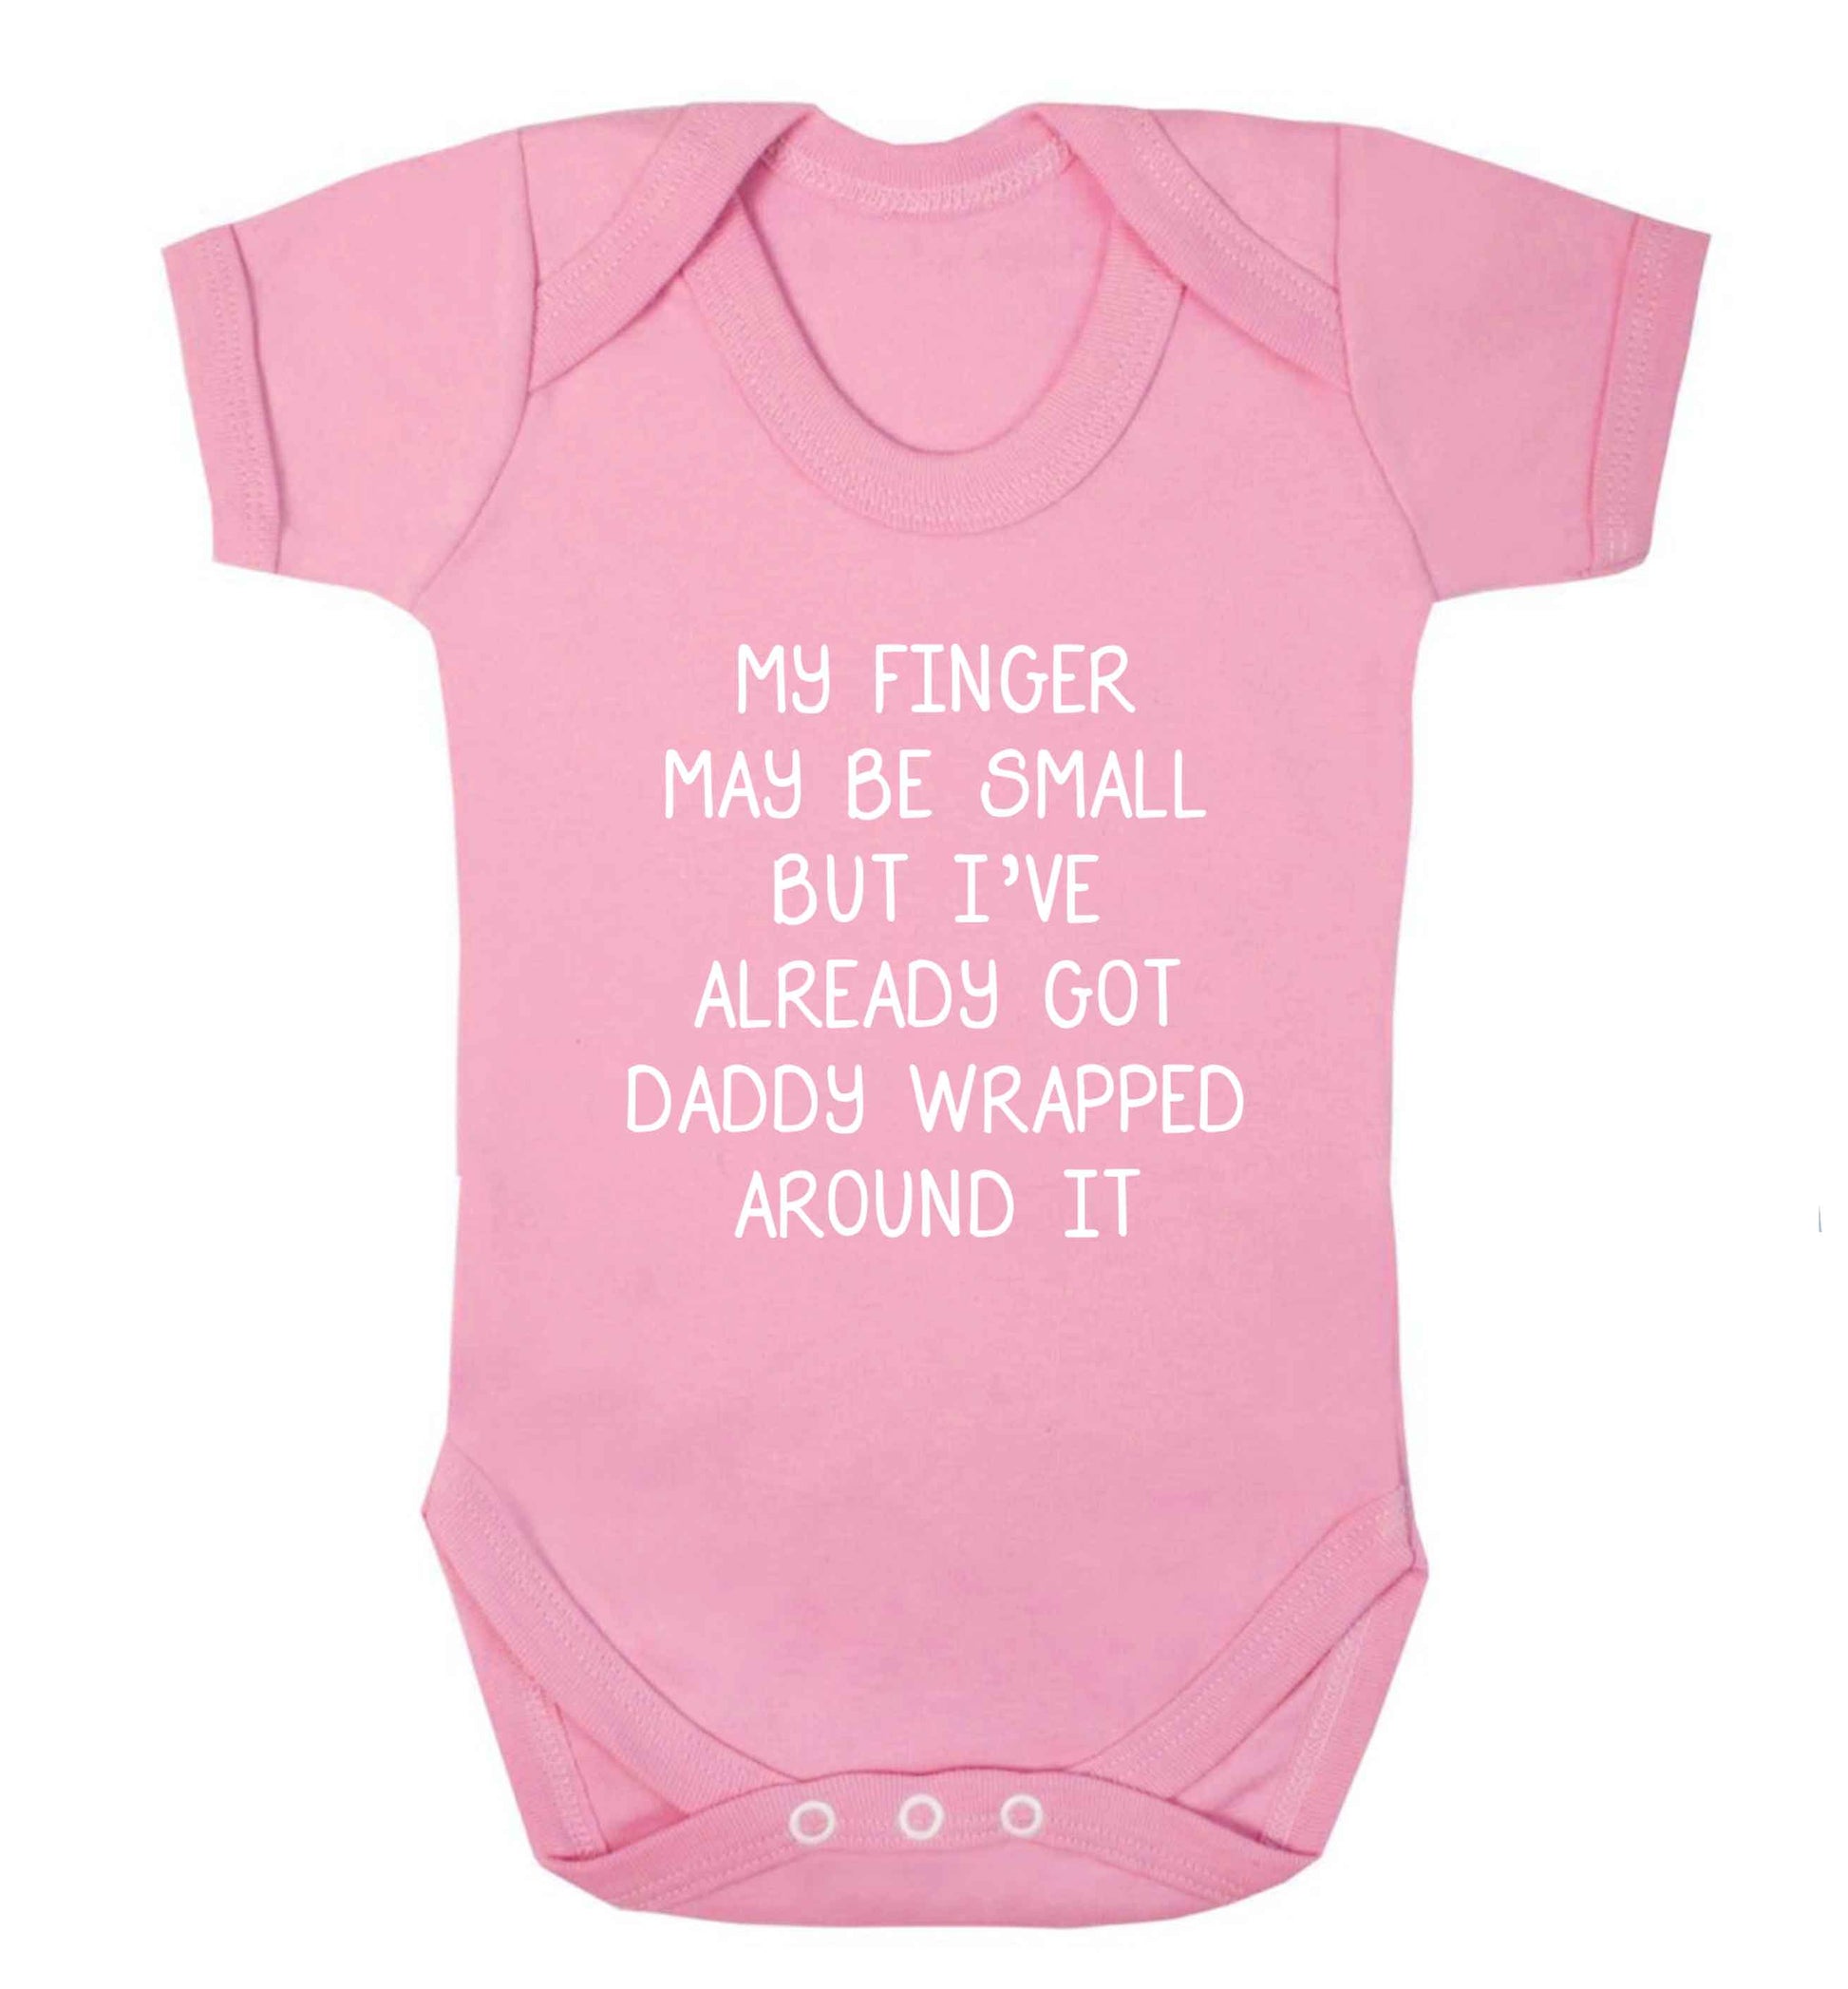 My finger may be small but I've already got daddy wrapped around it baby vest pale pink 18-24 months